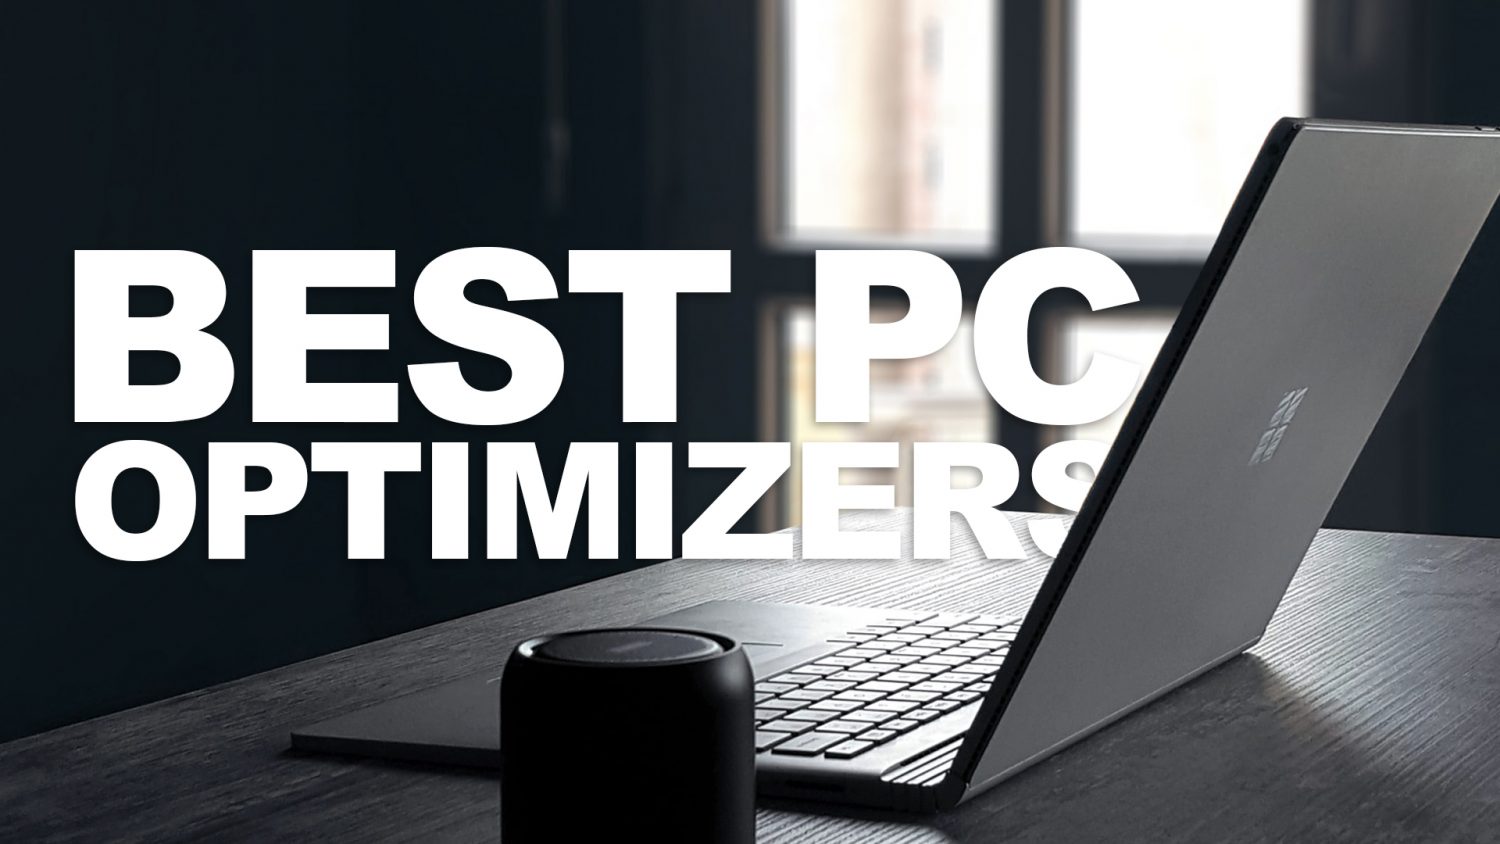 Best PC Optimizer Software for Windows